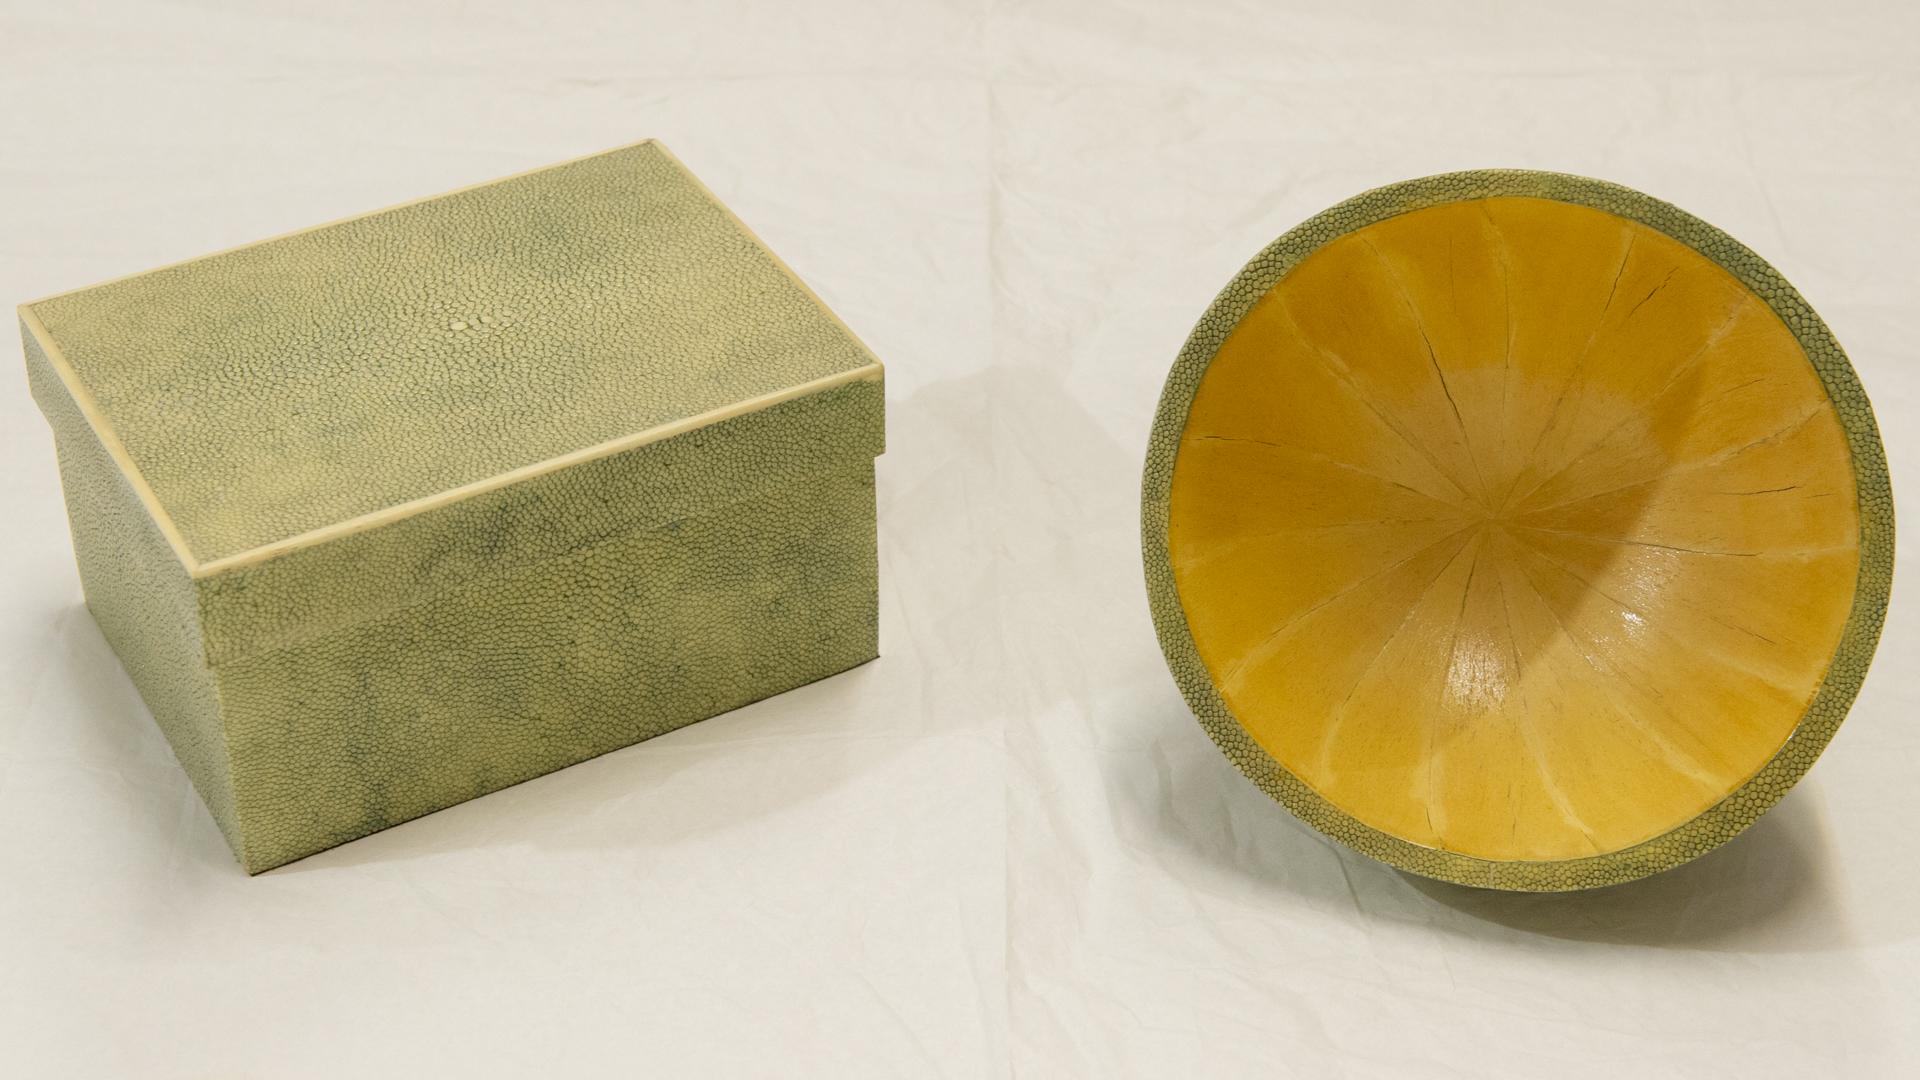 Rare complete Augousti bowl and box, vintage from the first one made by R & Y Augousti (bowl) and W&Y Augousti (box) in shagreen stingray : scientific name is 